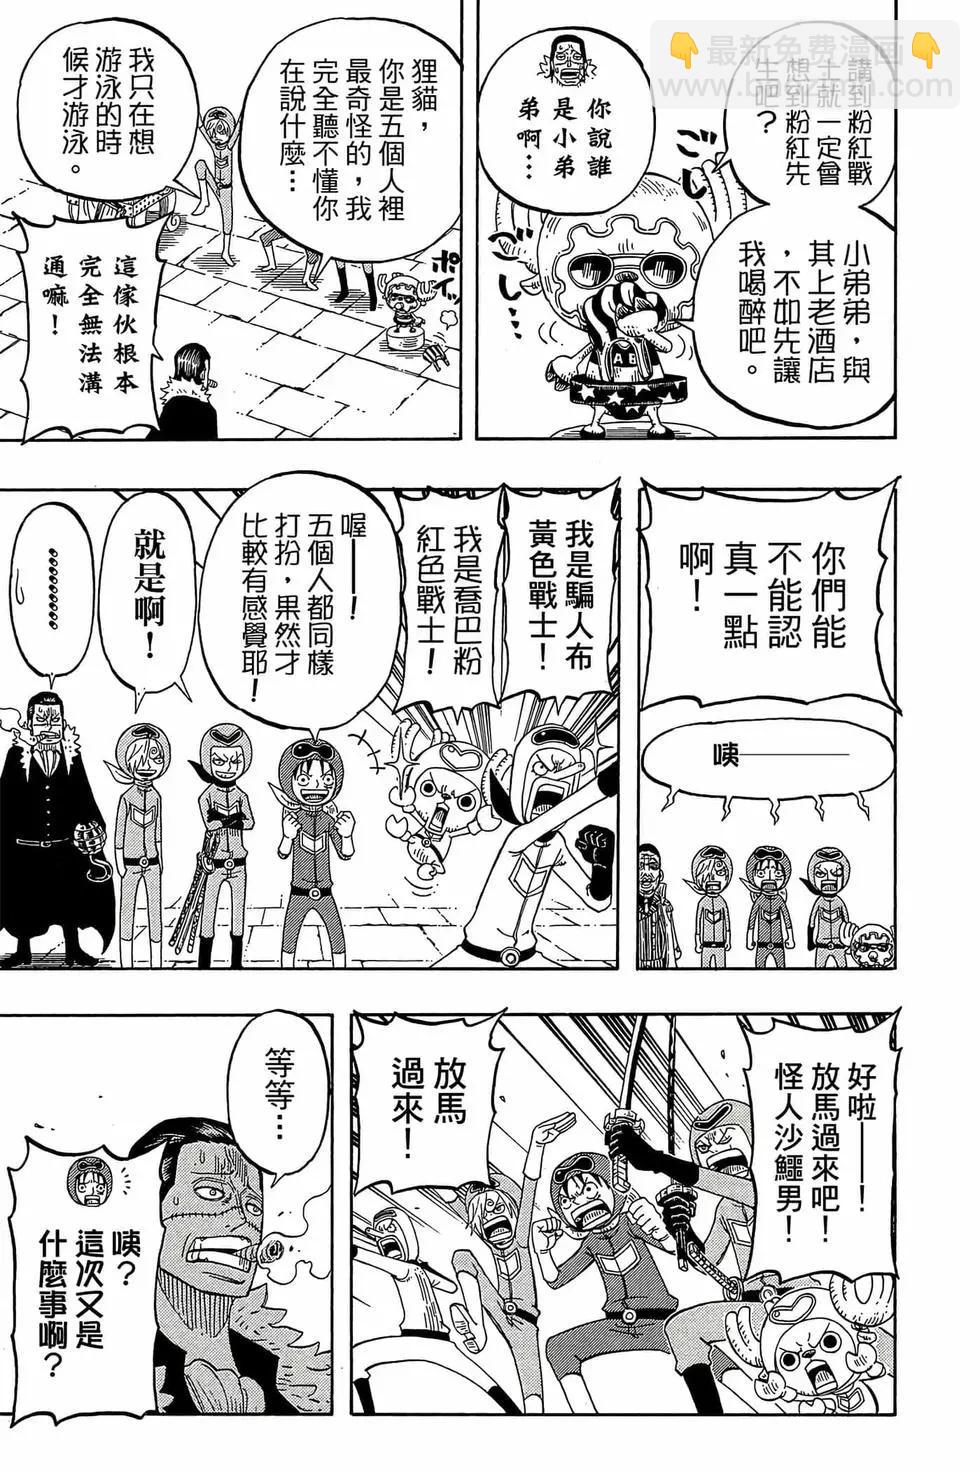 One piece party - 第01卷(4/4) - 2